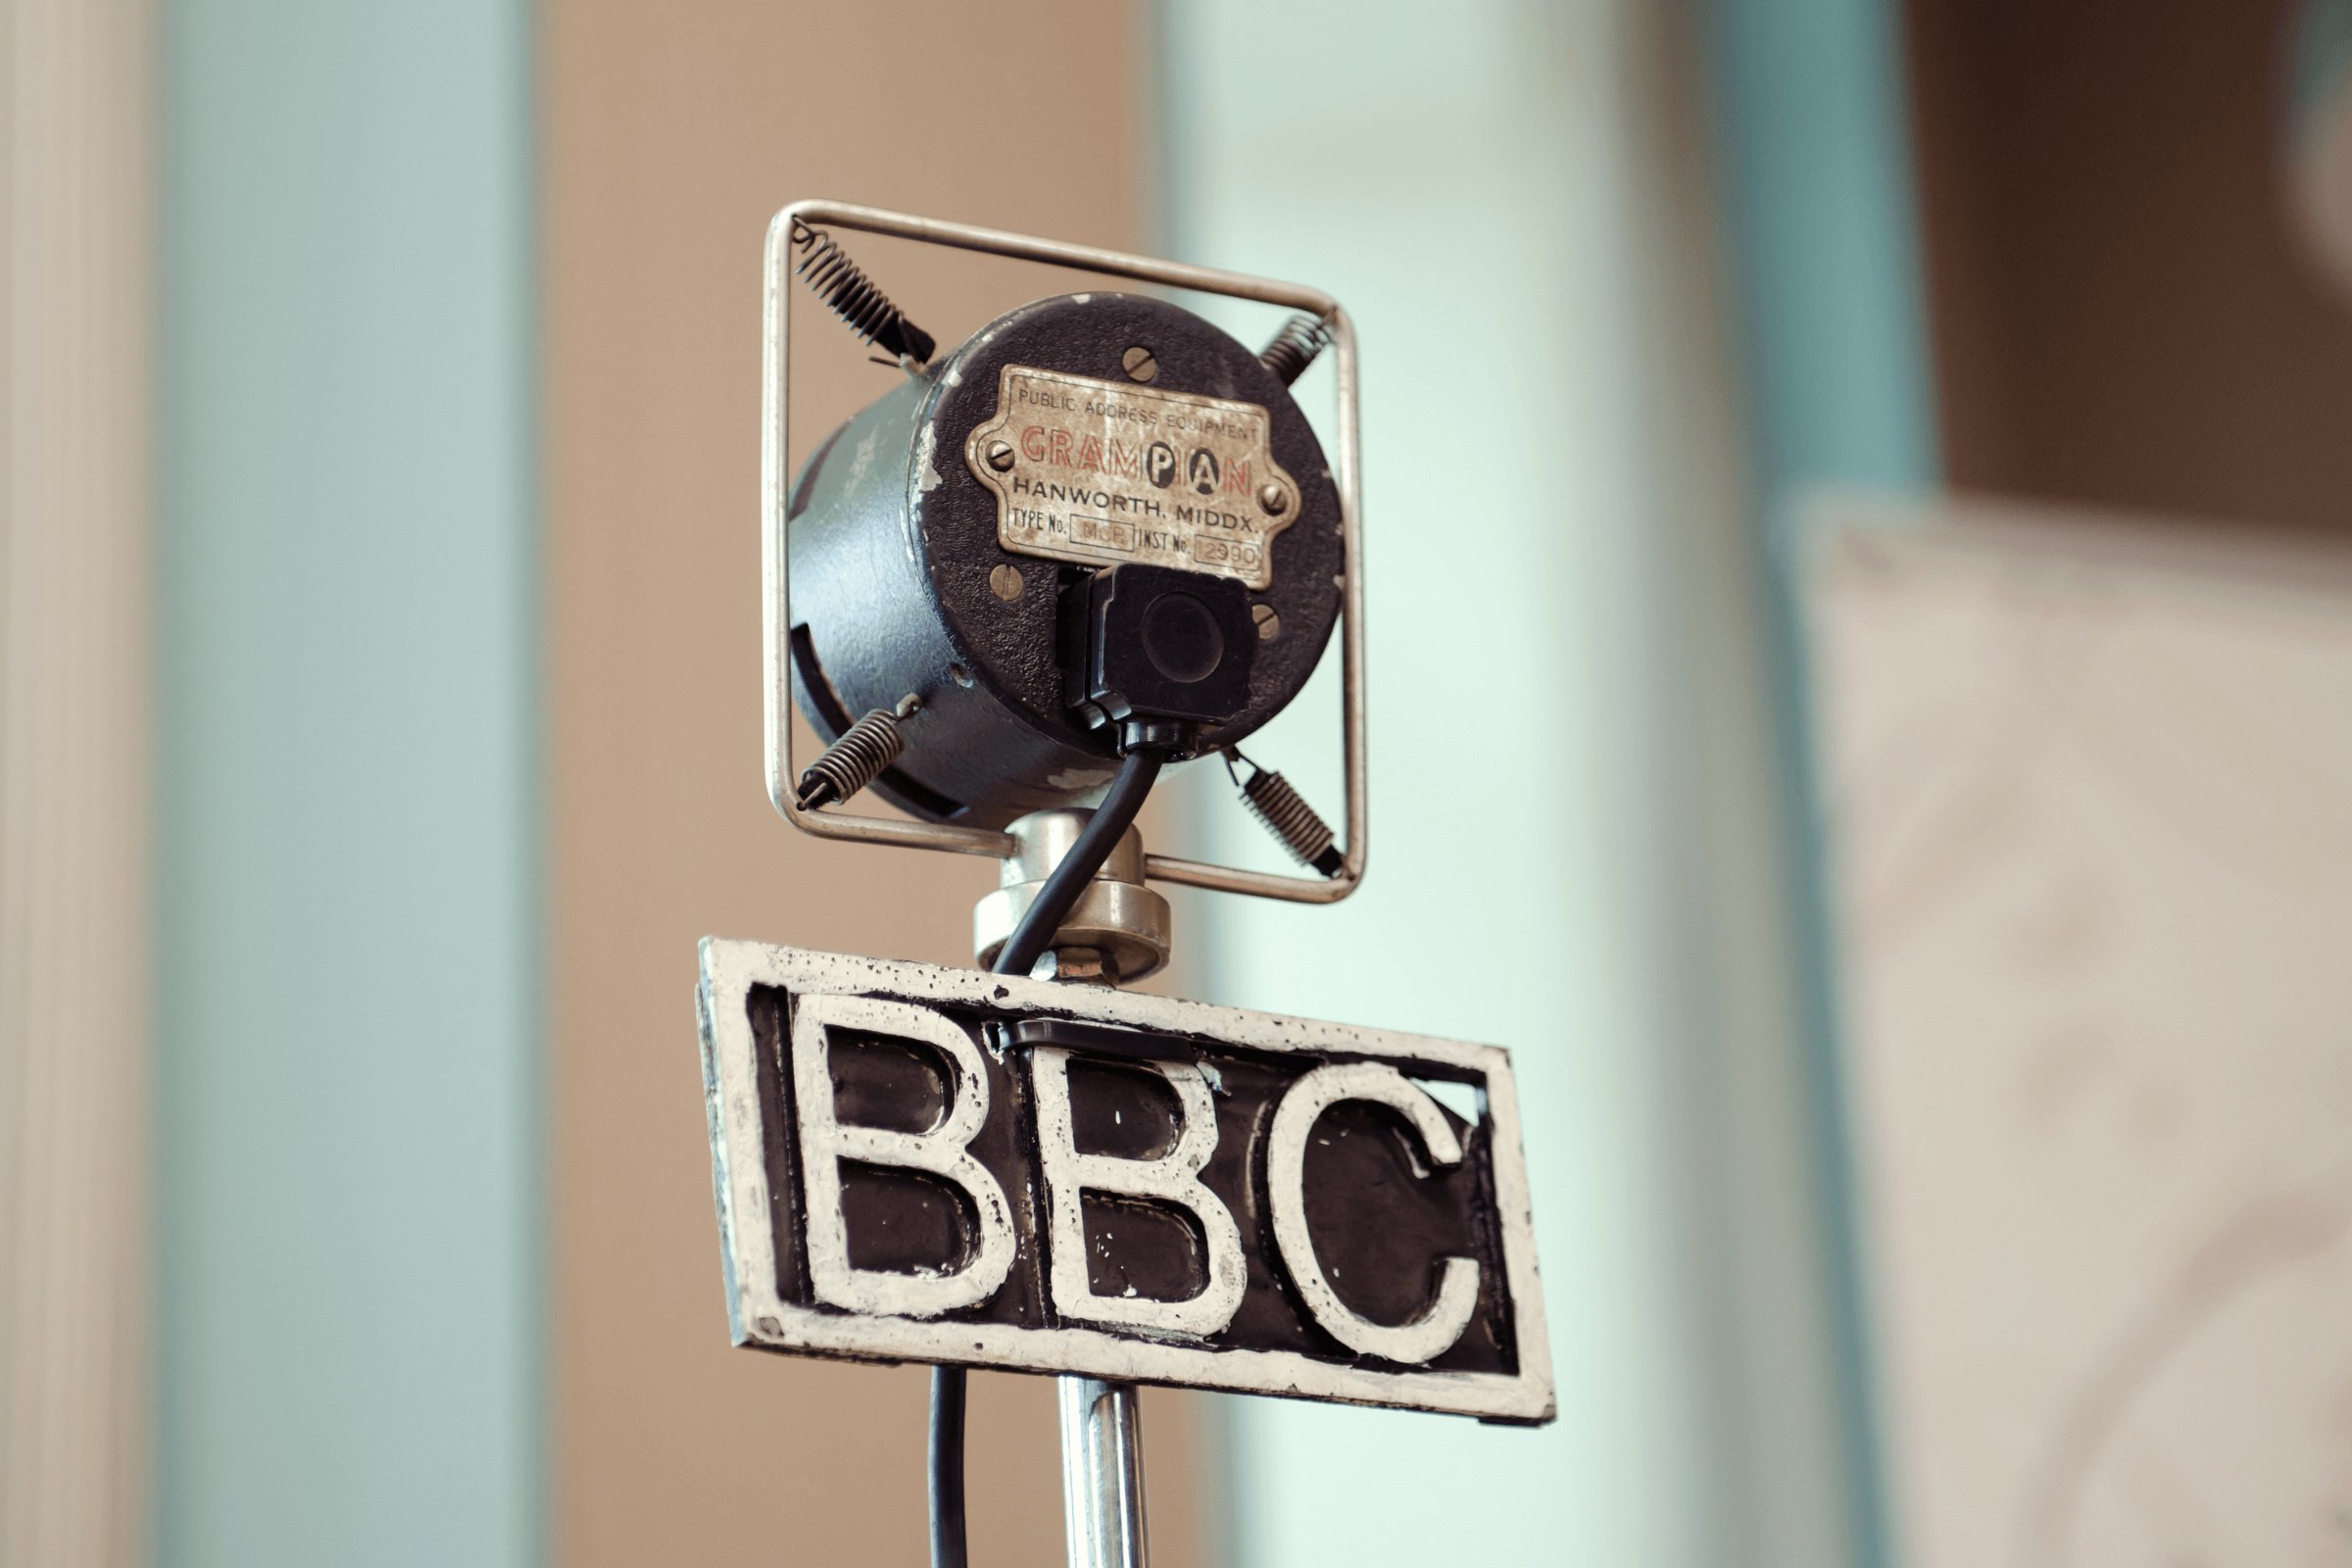 The BBC and Religion